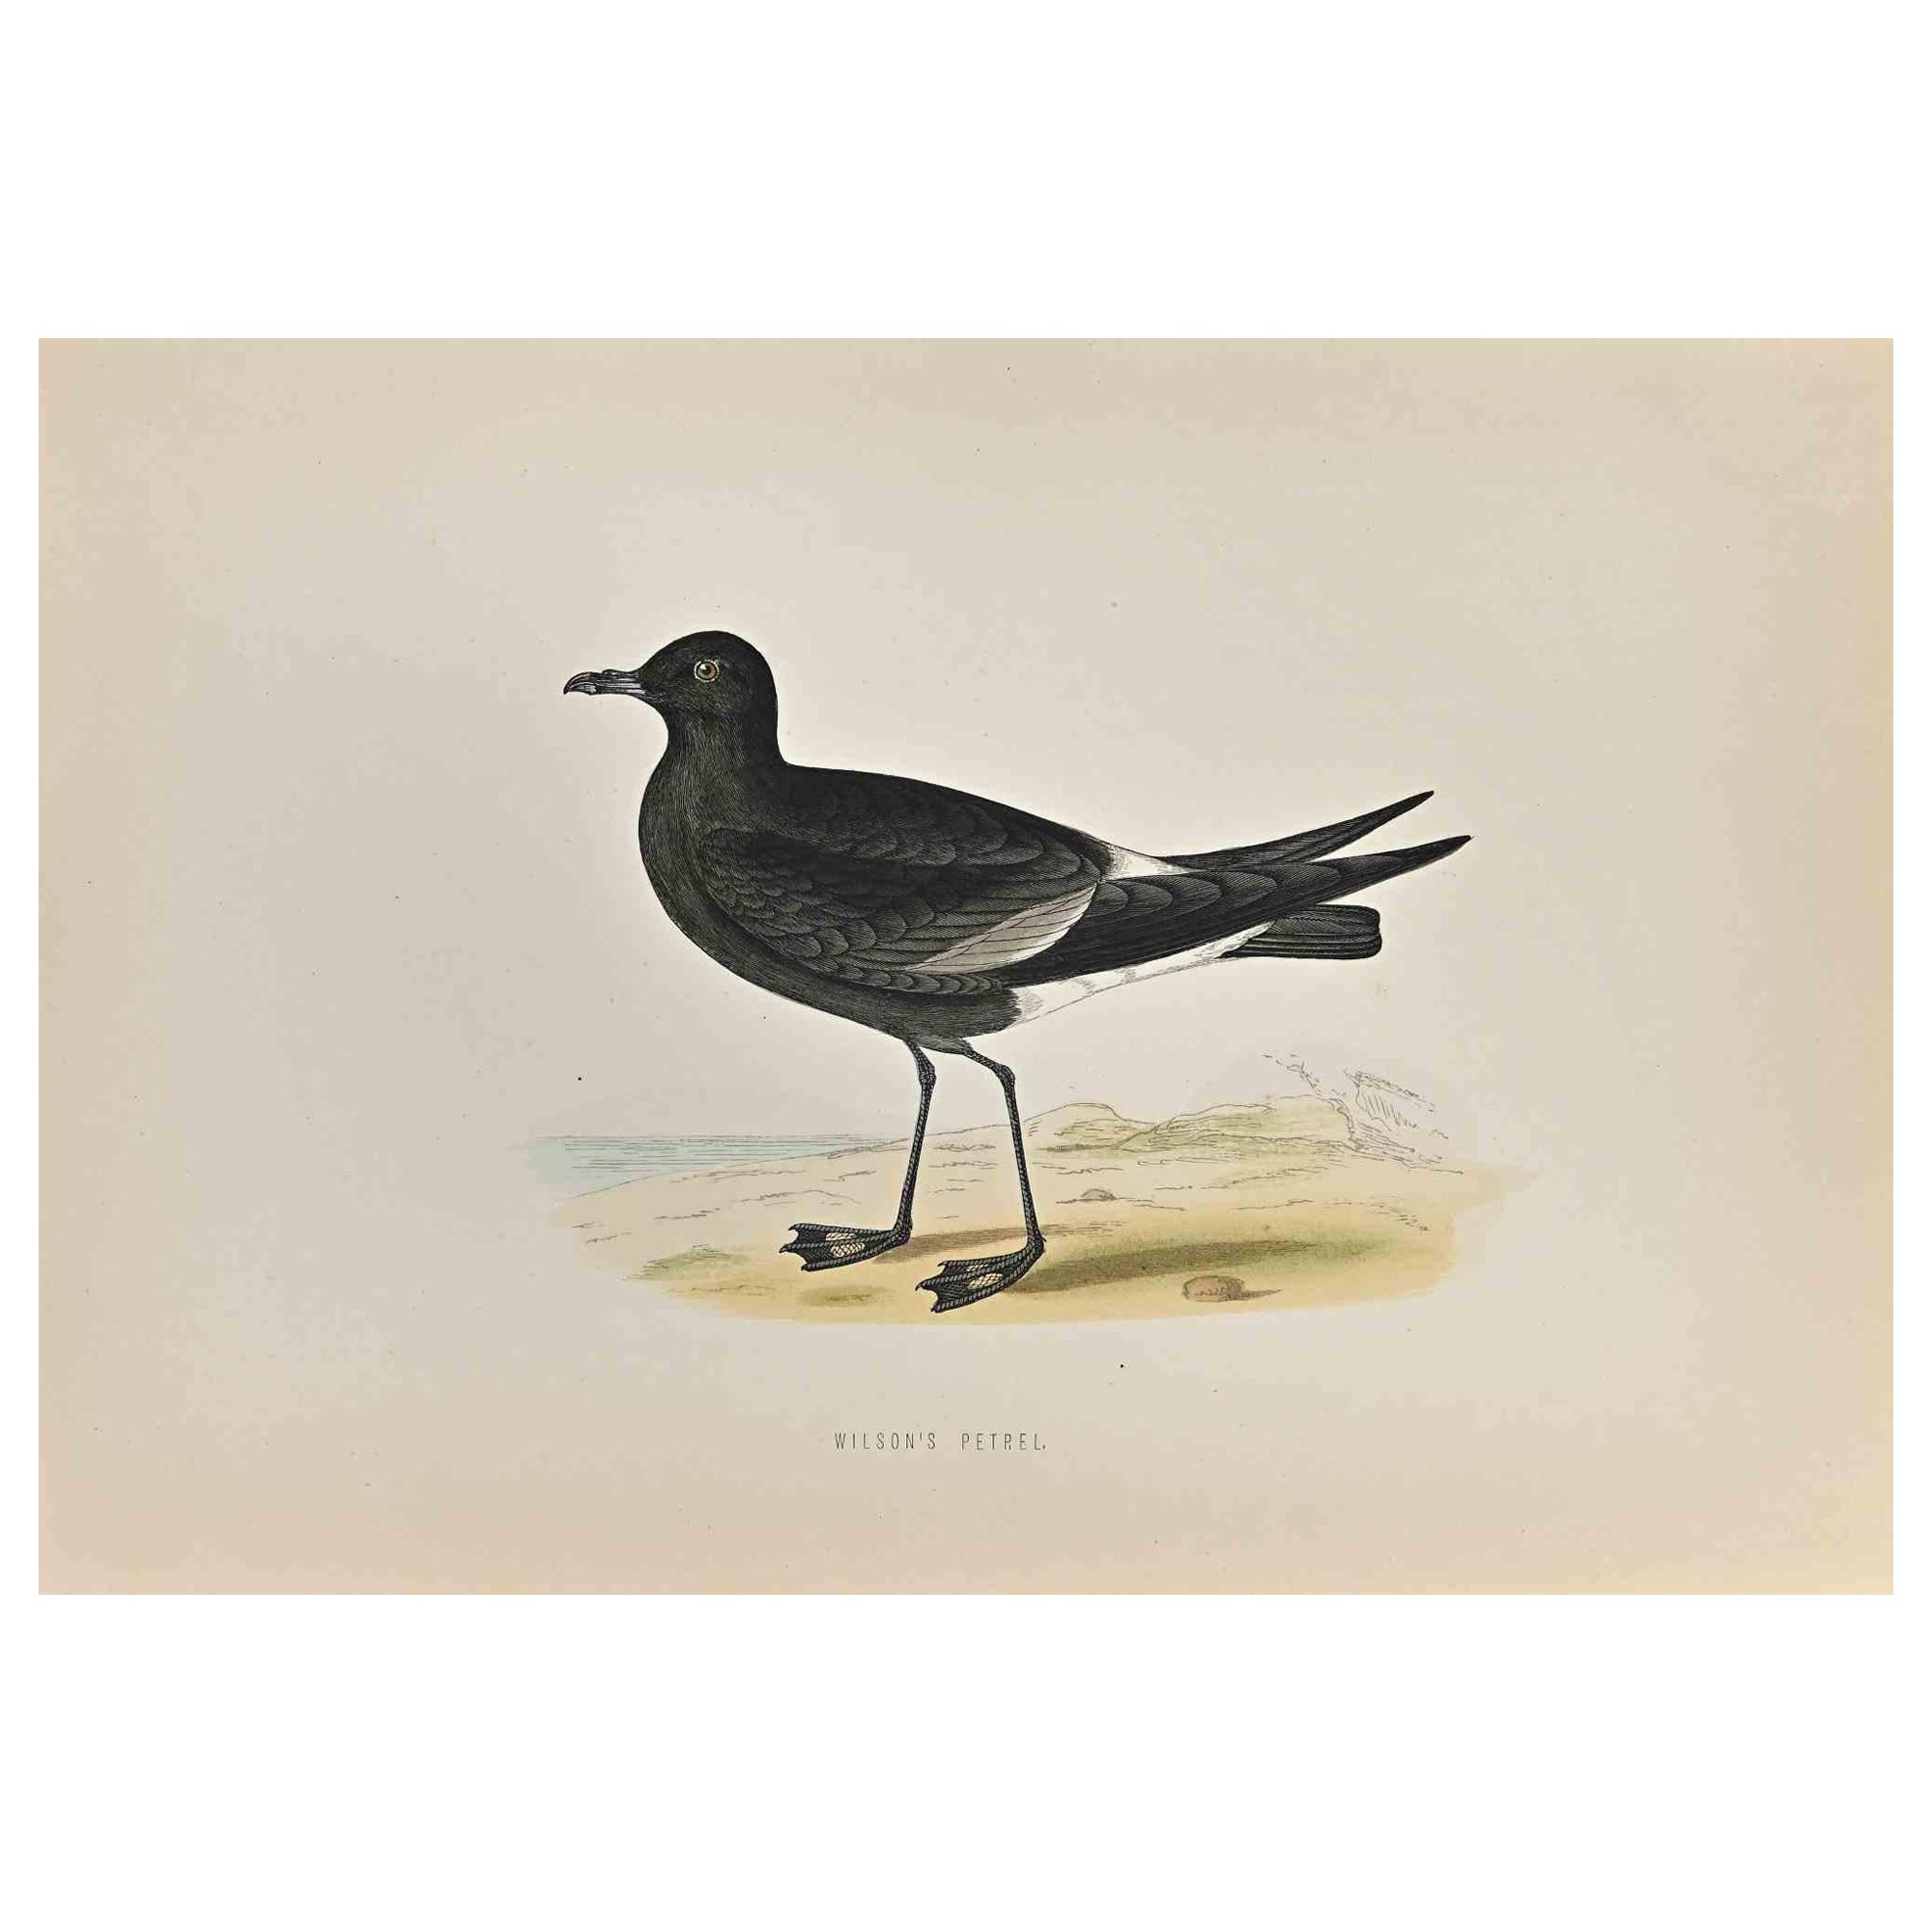  Wilson's Petrel is a modern artwork realized in 1870 by the British artist Alexander Francis Lydon (1836-1917) . 

Woodcut print, hand colored, published by London, Bell & Sons, 1870.  Name of the bird printed in plate. This work is part of a print